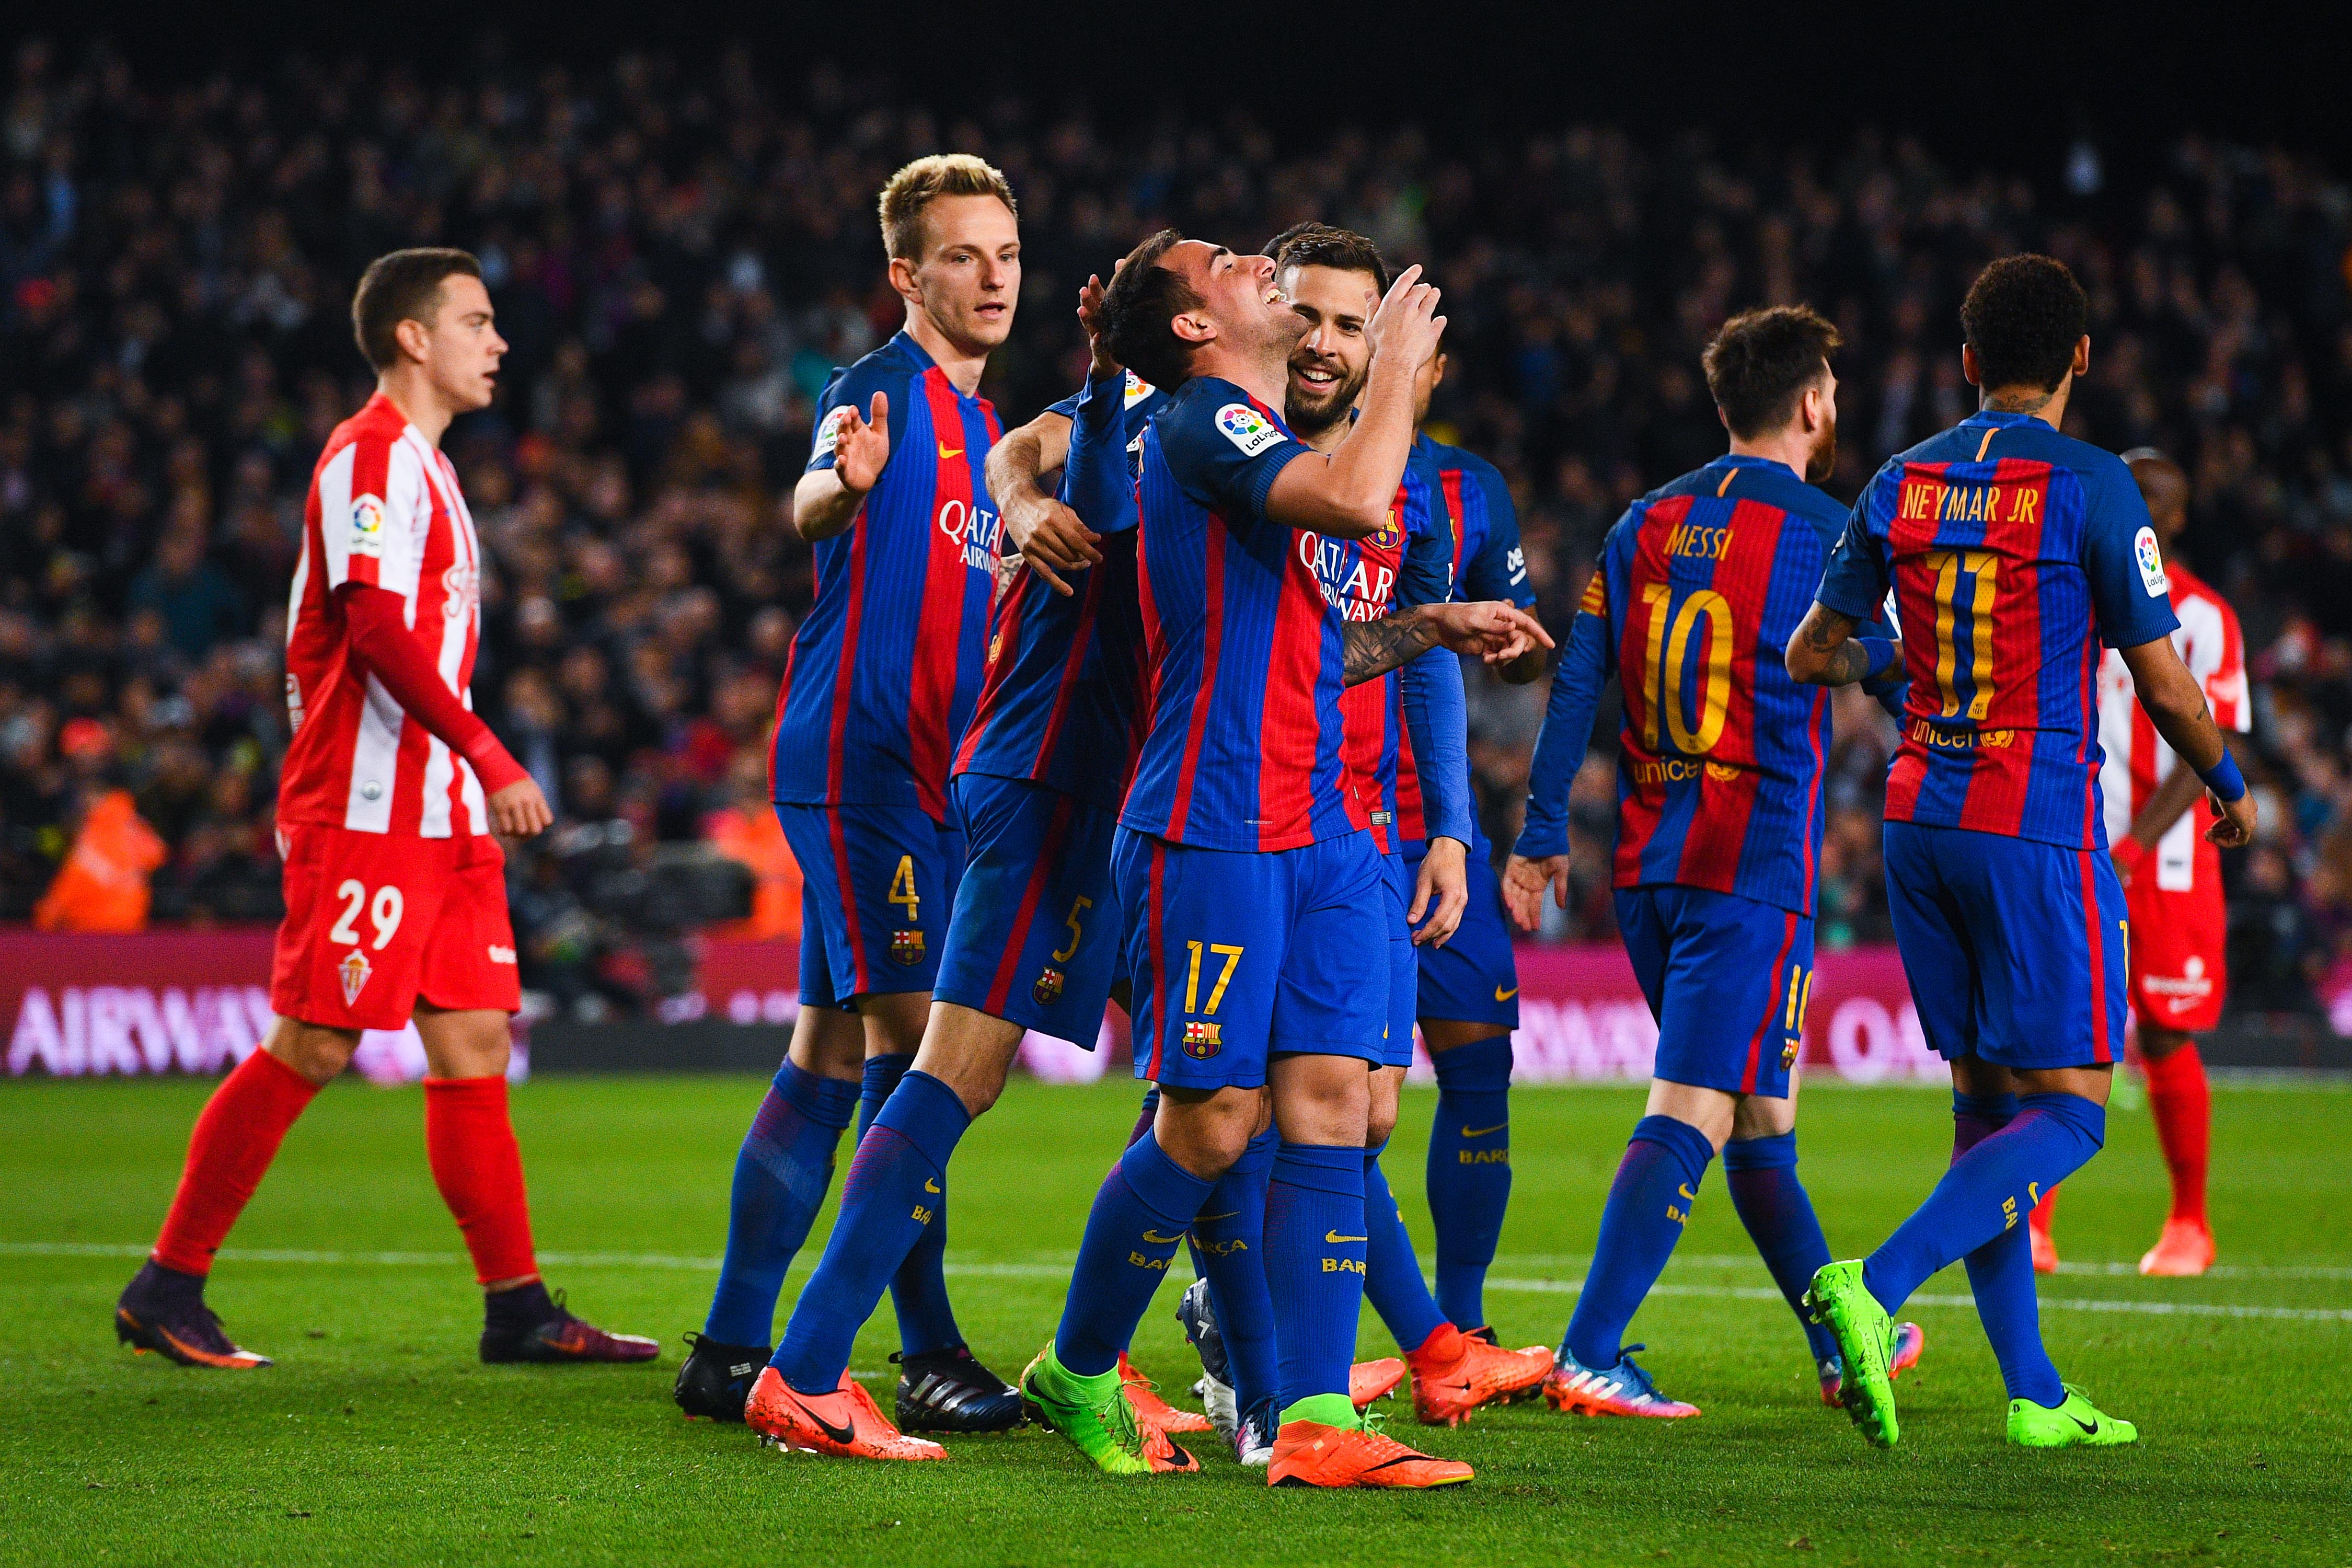 BARCELONA, SPAIN - MARCH 01:  Paco Alcacer of FC Barcelona celebrates with his team mates after scoring his team's fourth goal during the La Liga match between FC Barcelona and Real Sporting de Gijon at Camp Nou stadium on March 1, 2017 in Barcelona, Spain.  (Photo by David Ramos/Getty Images)